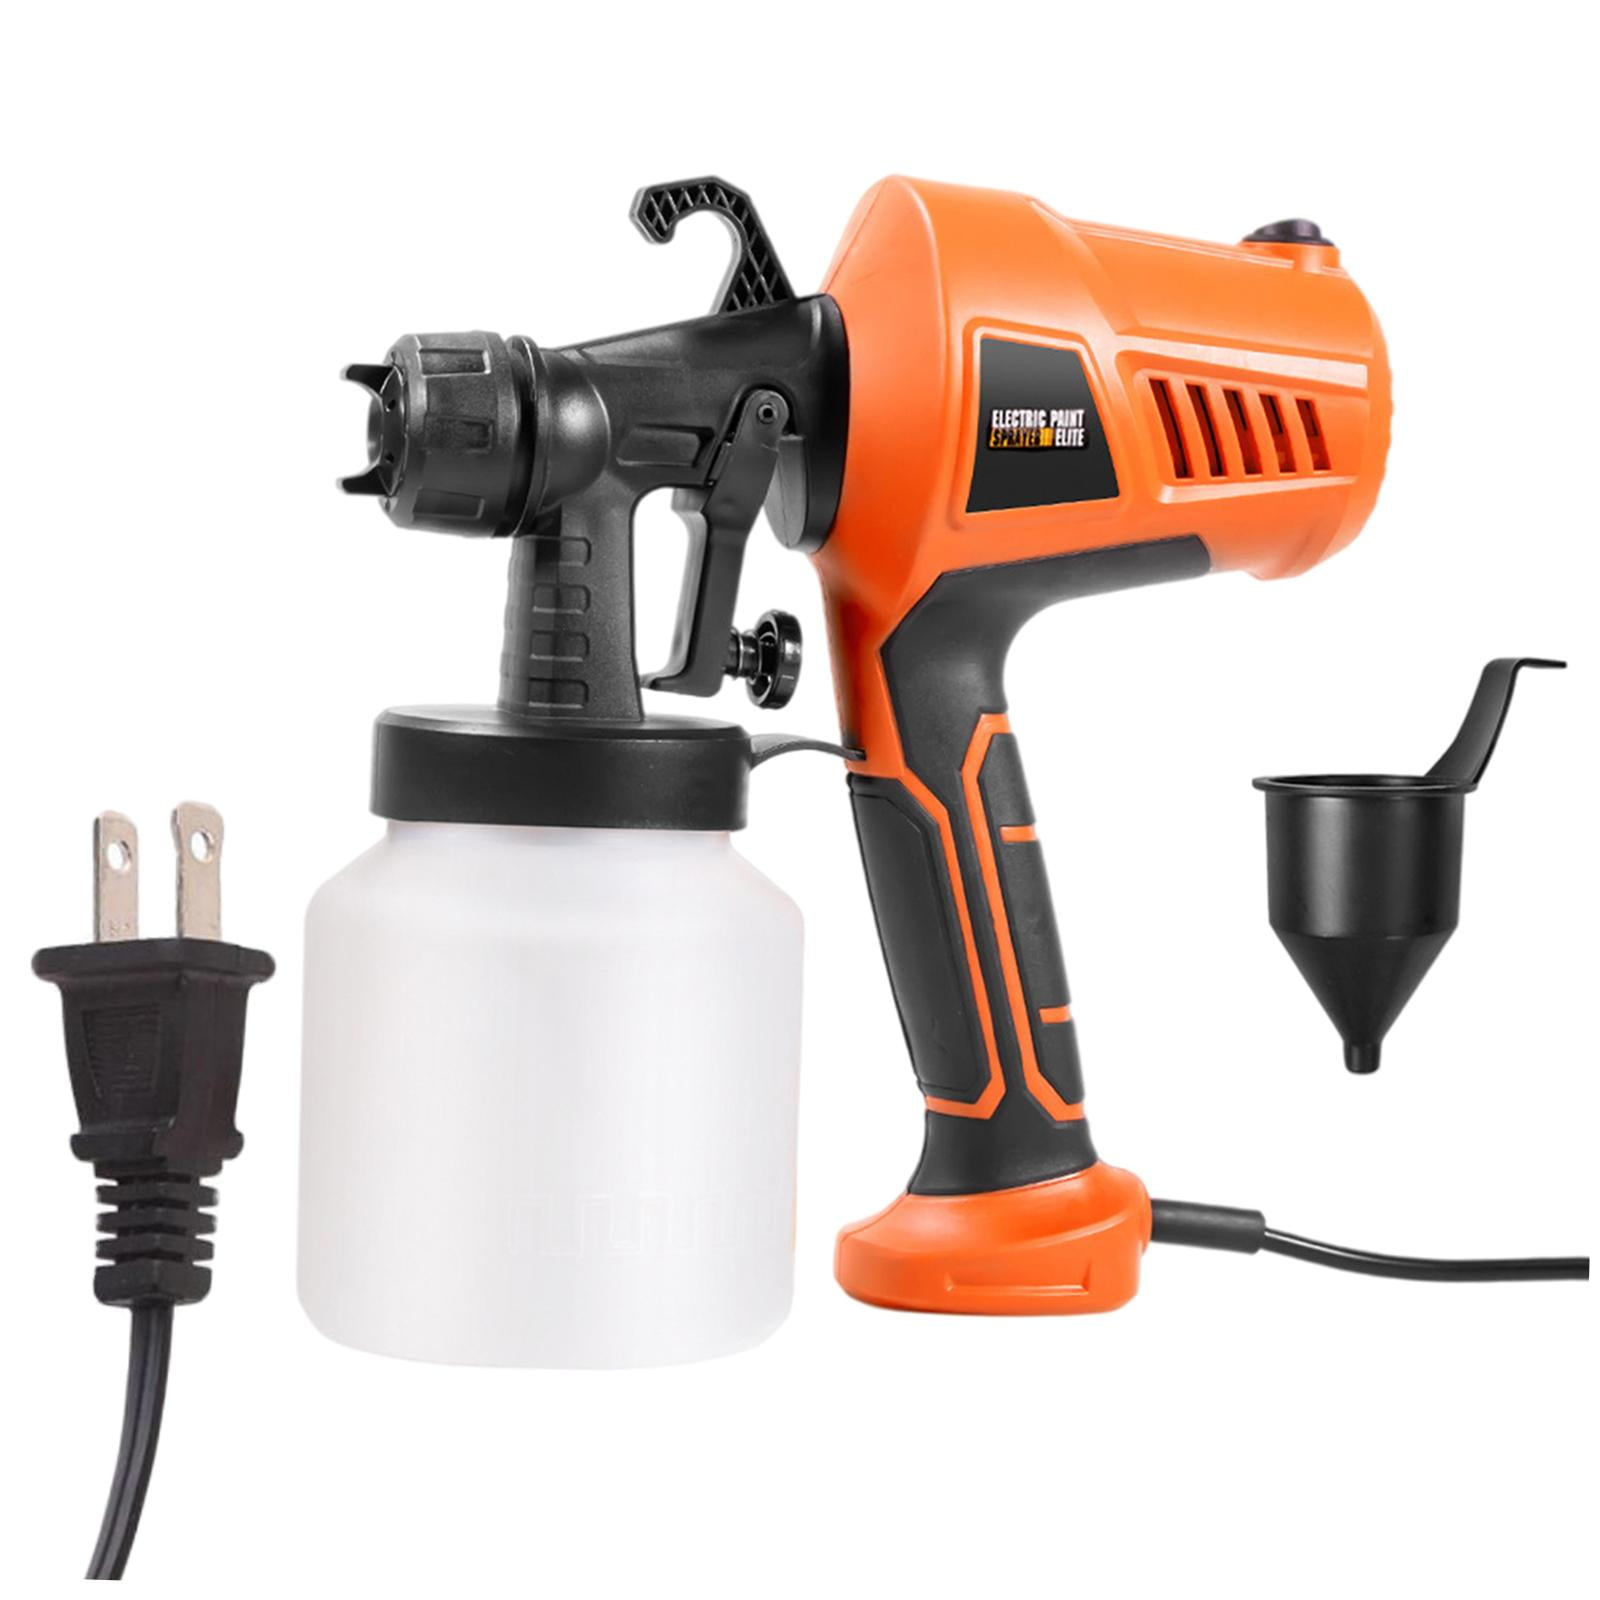 NEU MASTER Paint Sprayer, 600W HVLP Electric Spray Paint Gun with 6FT  Airhose for House Painting, Ceiling, Home Interior and Exterior